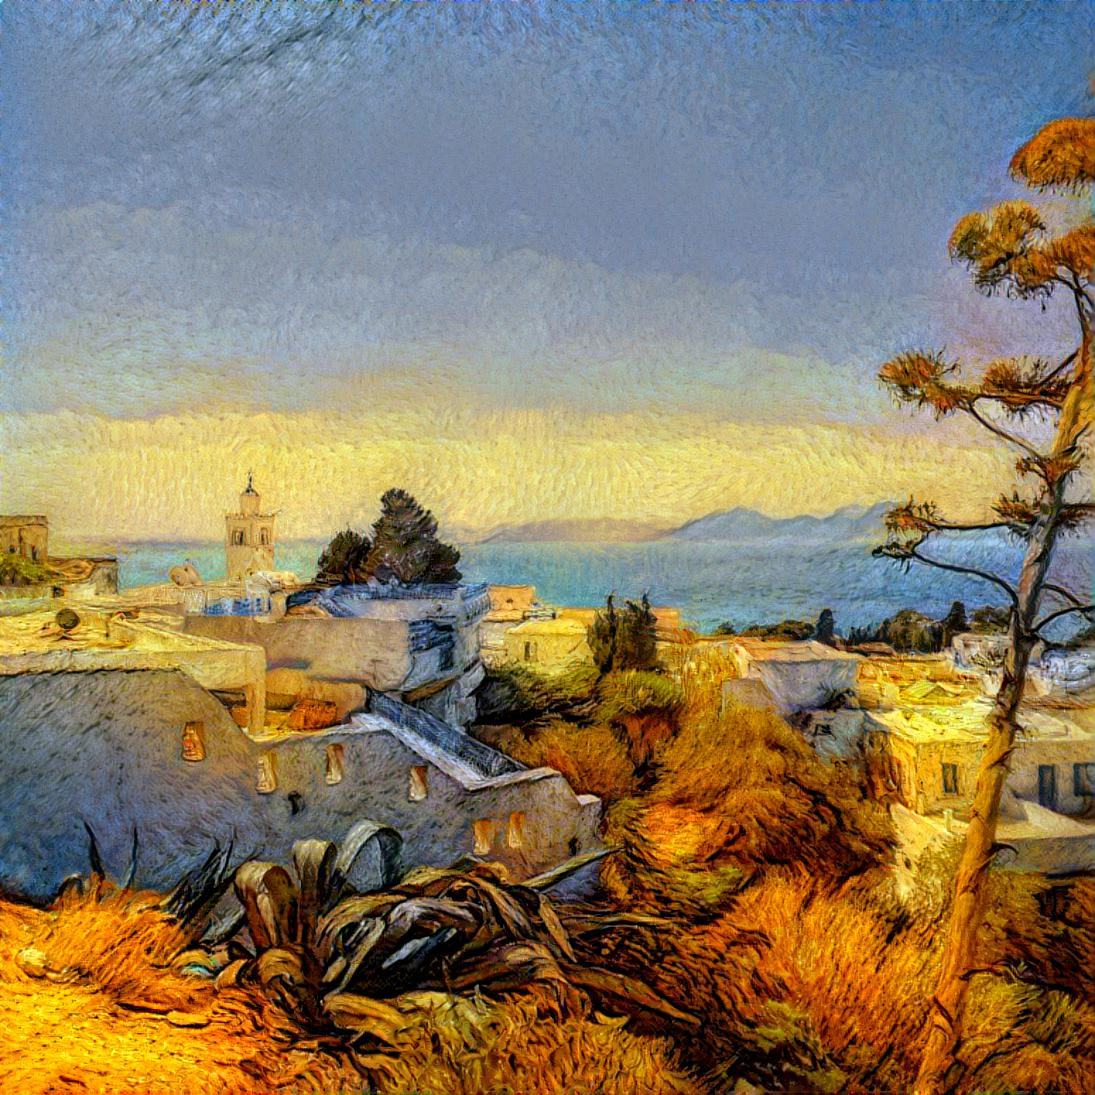 Sidi Bou Said by Tyna in the manner of vanGogh